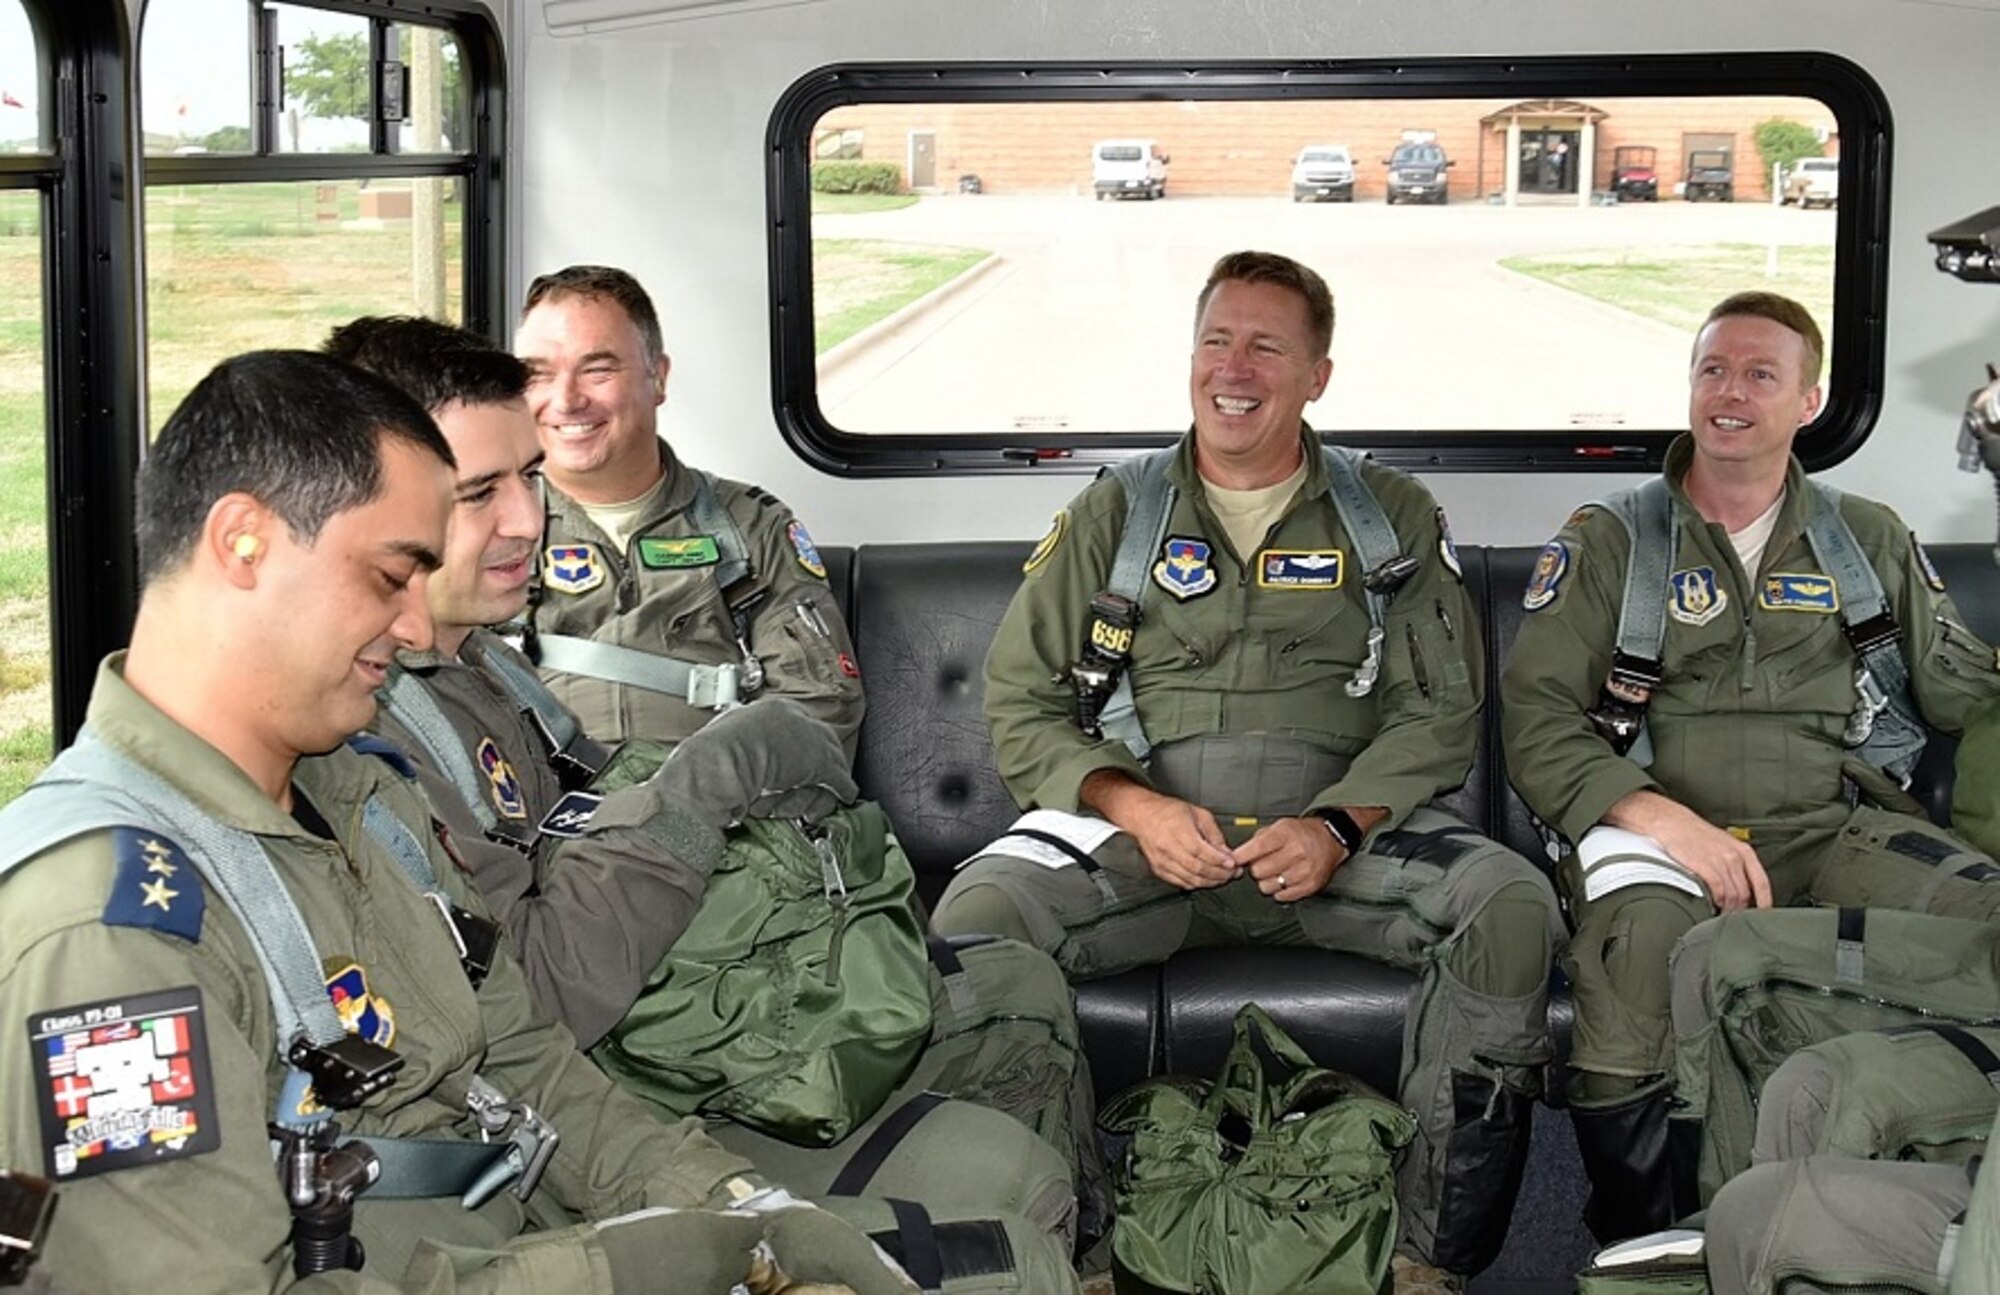 U.S. Air Force Maj. Gen. Patrick Doherty (center), 19th Air Force commander, joins members of the 459th and 89th Flying Training Squadrons before a tactical formation sortie during T-6 continuation training at Sheppard Air Force Base, Texas, Aug. 22, 2018. Doherty has made it a priority to visit all of the flying training wings to immerse Airmen in important issues pertaining to the Numbered Air Force. (Courtesy Photo)